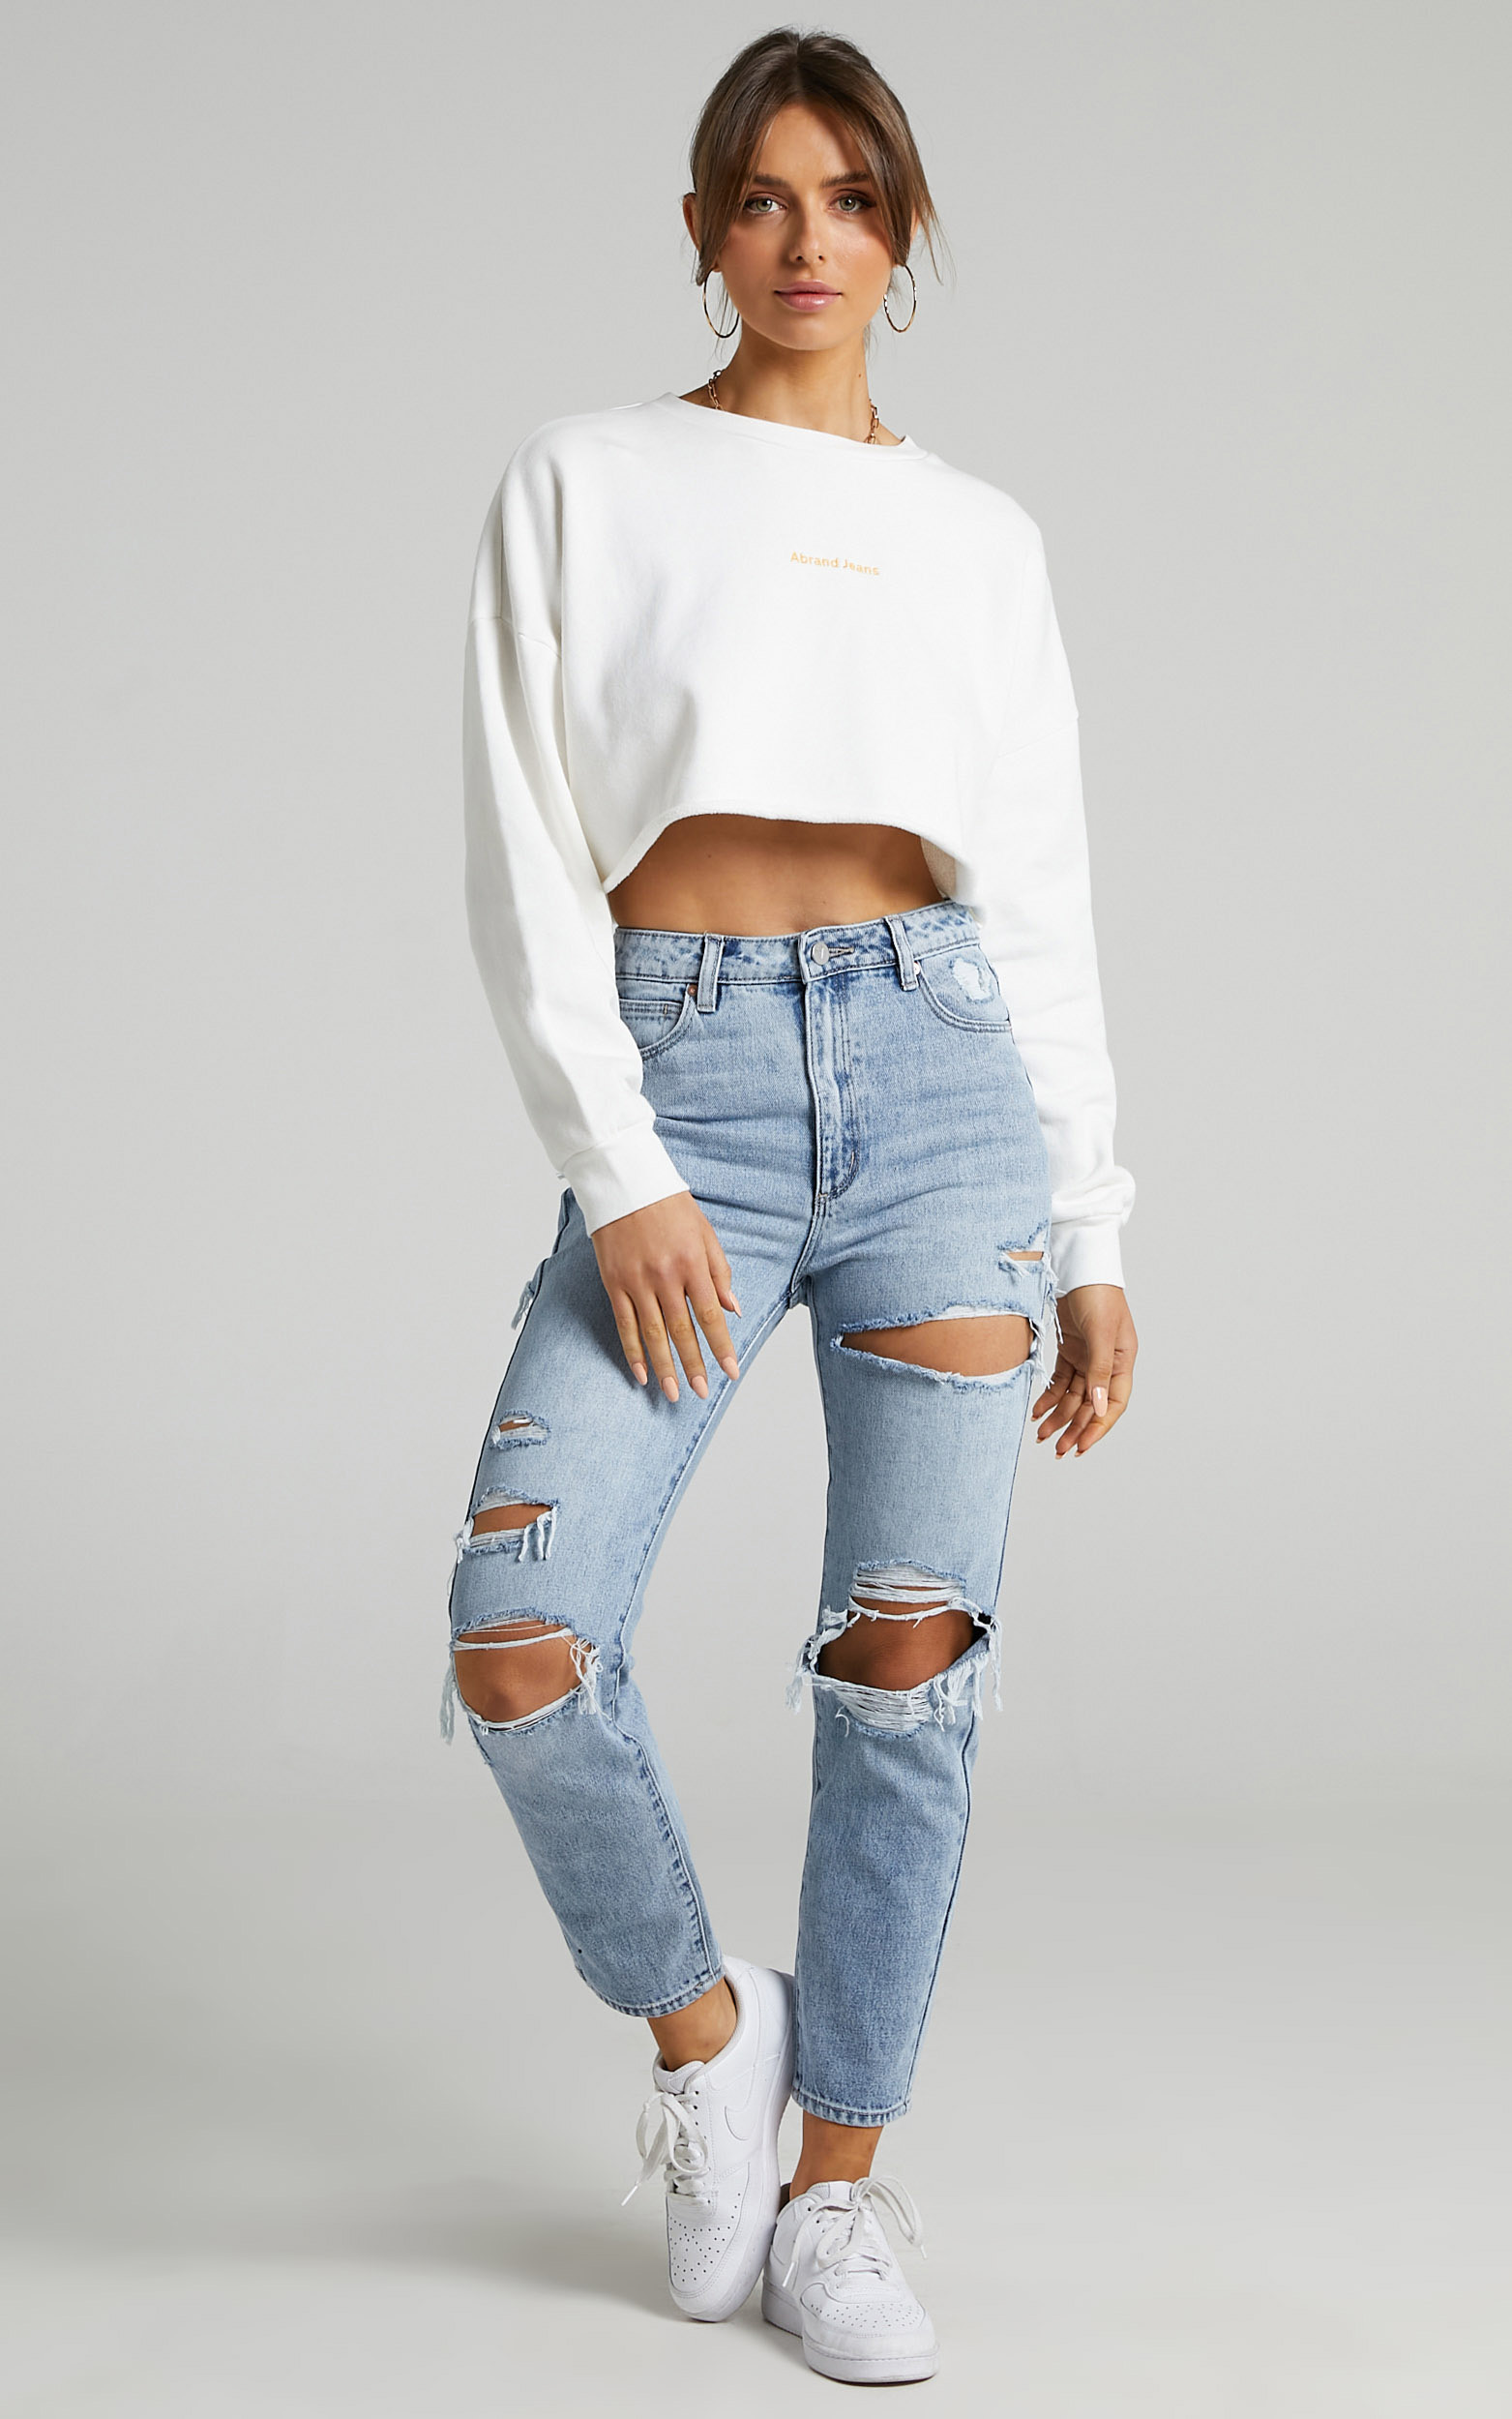 Abrand - A Cropped Oversized Sweater in White Sand - L, WHT1, hi-res image number null